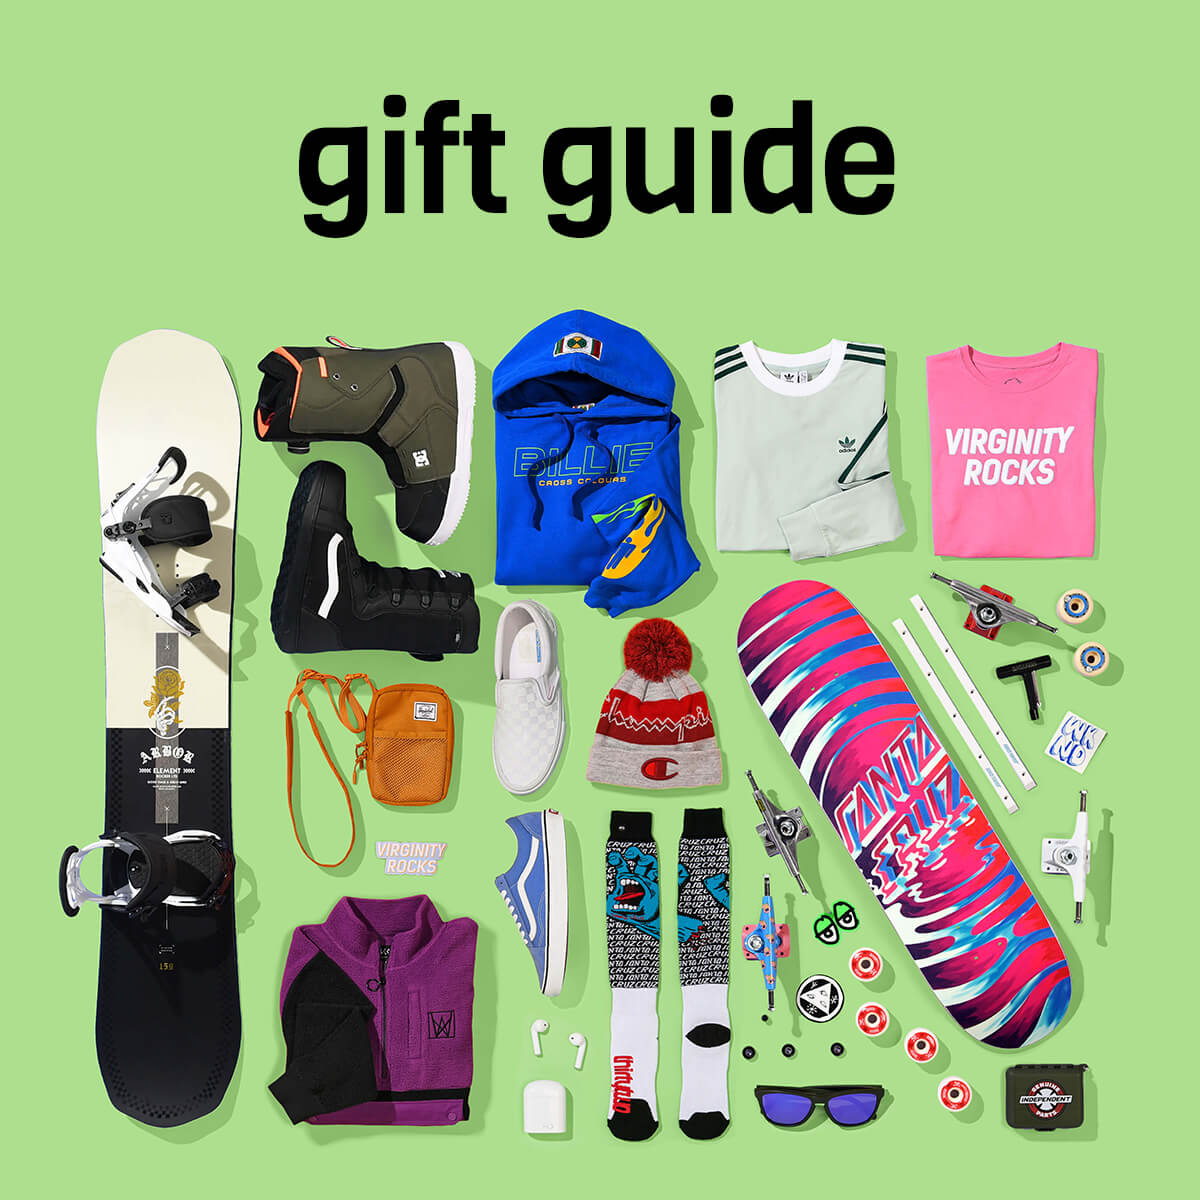 THE GIFT GUIDE - SHOP NOW